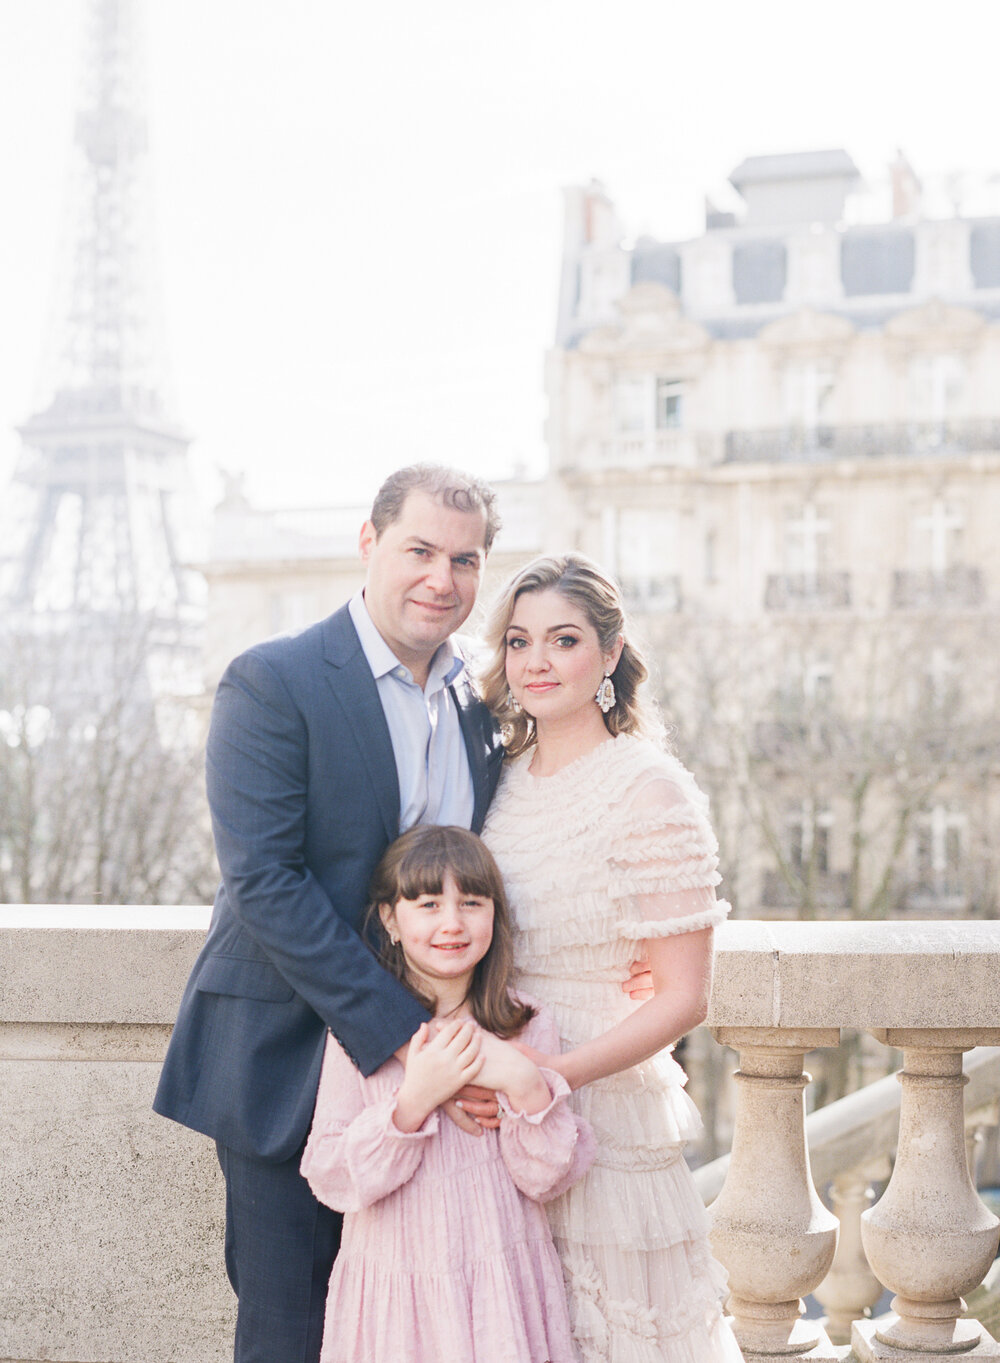 Pretty-in-Pink Paris Family Photoshoot by Onorina Jomir Beauty-09